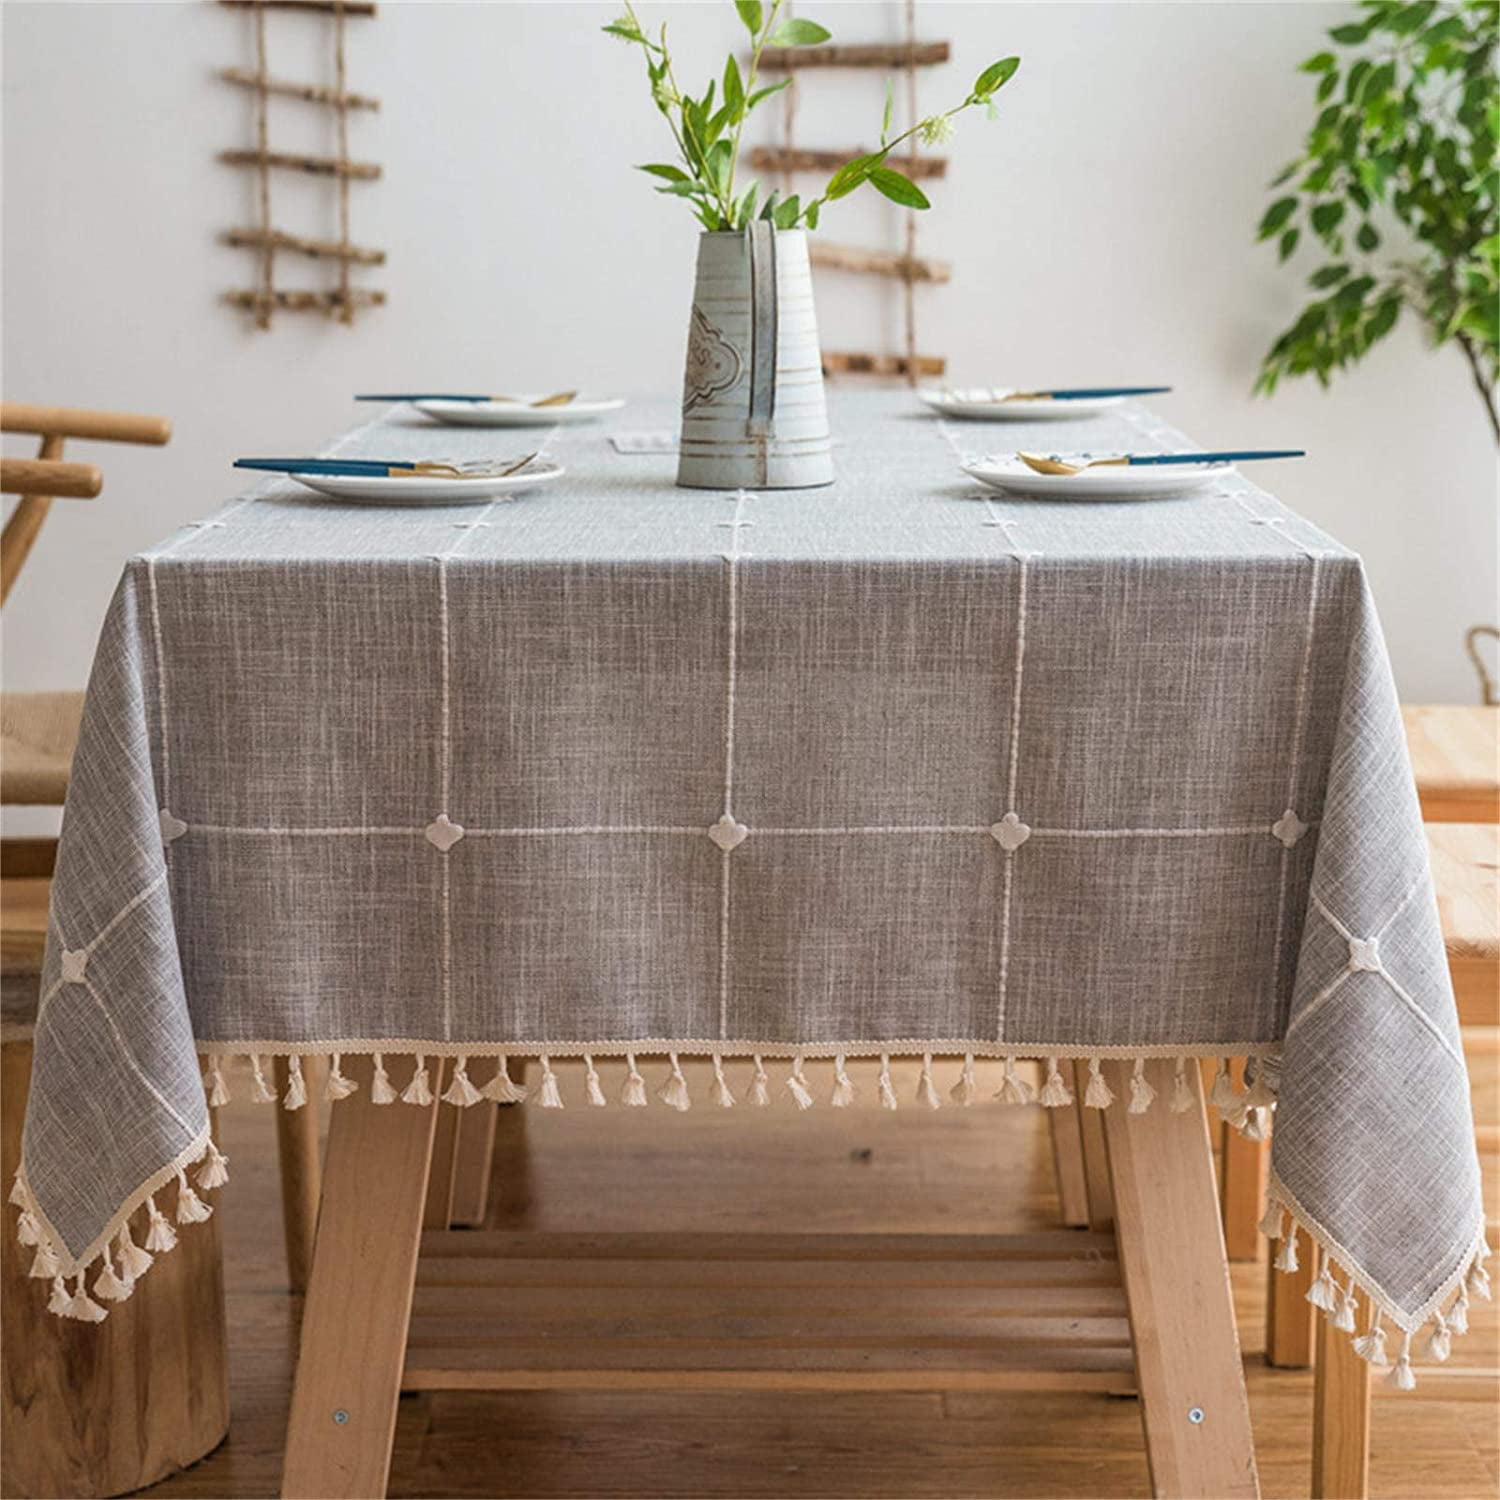 Plaid Tablecloth Cotton Linen Rectange Table Cloth Cover Tassel Dining Kitchen